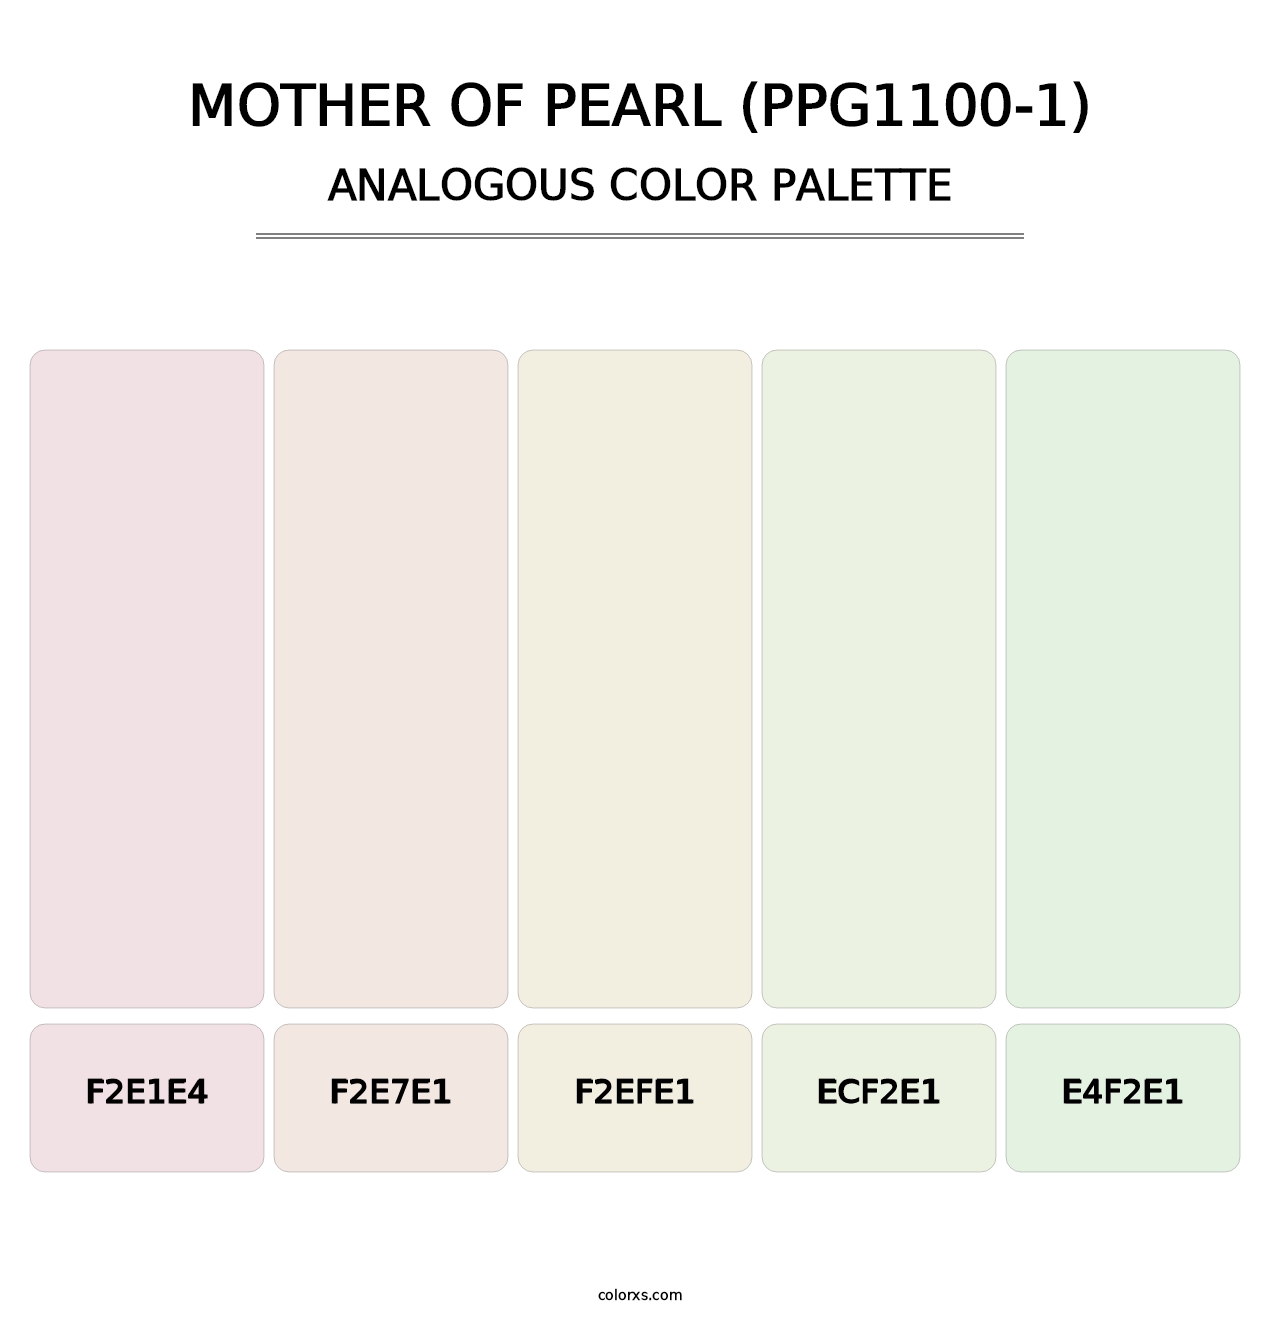 Mother Of Pearl (PPG1100-1) - Analogous Color Palette